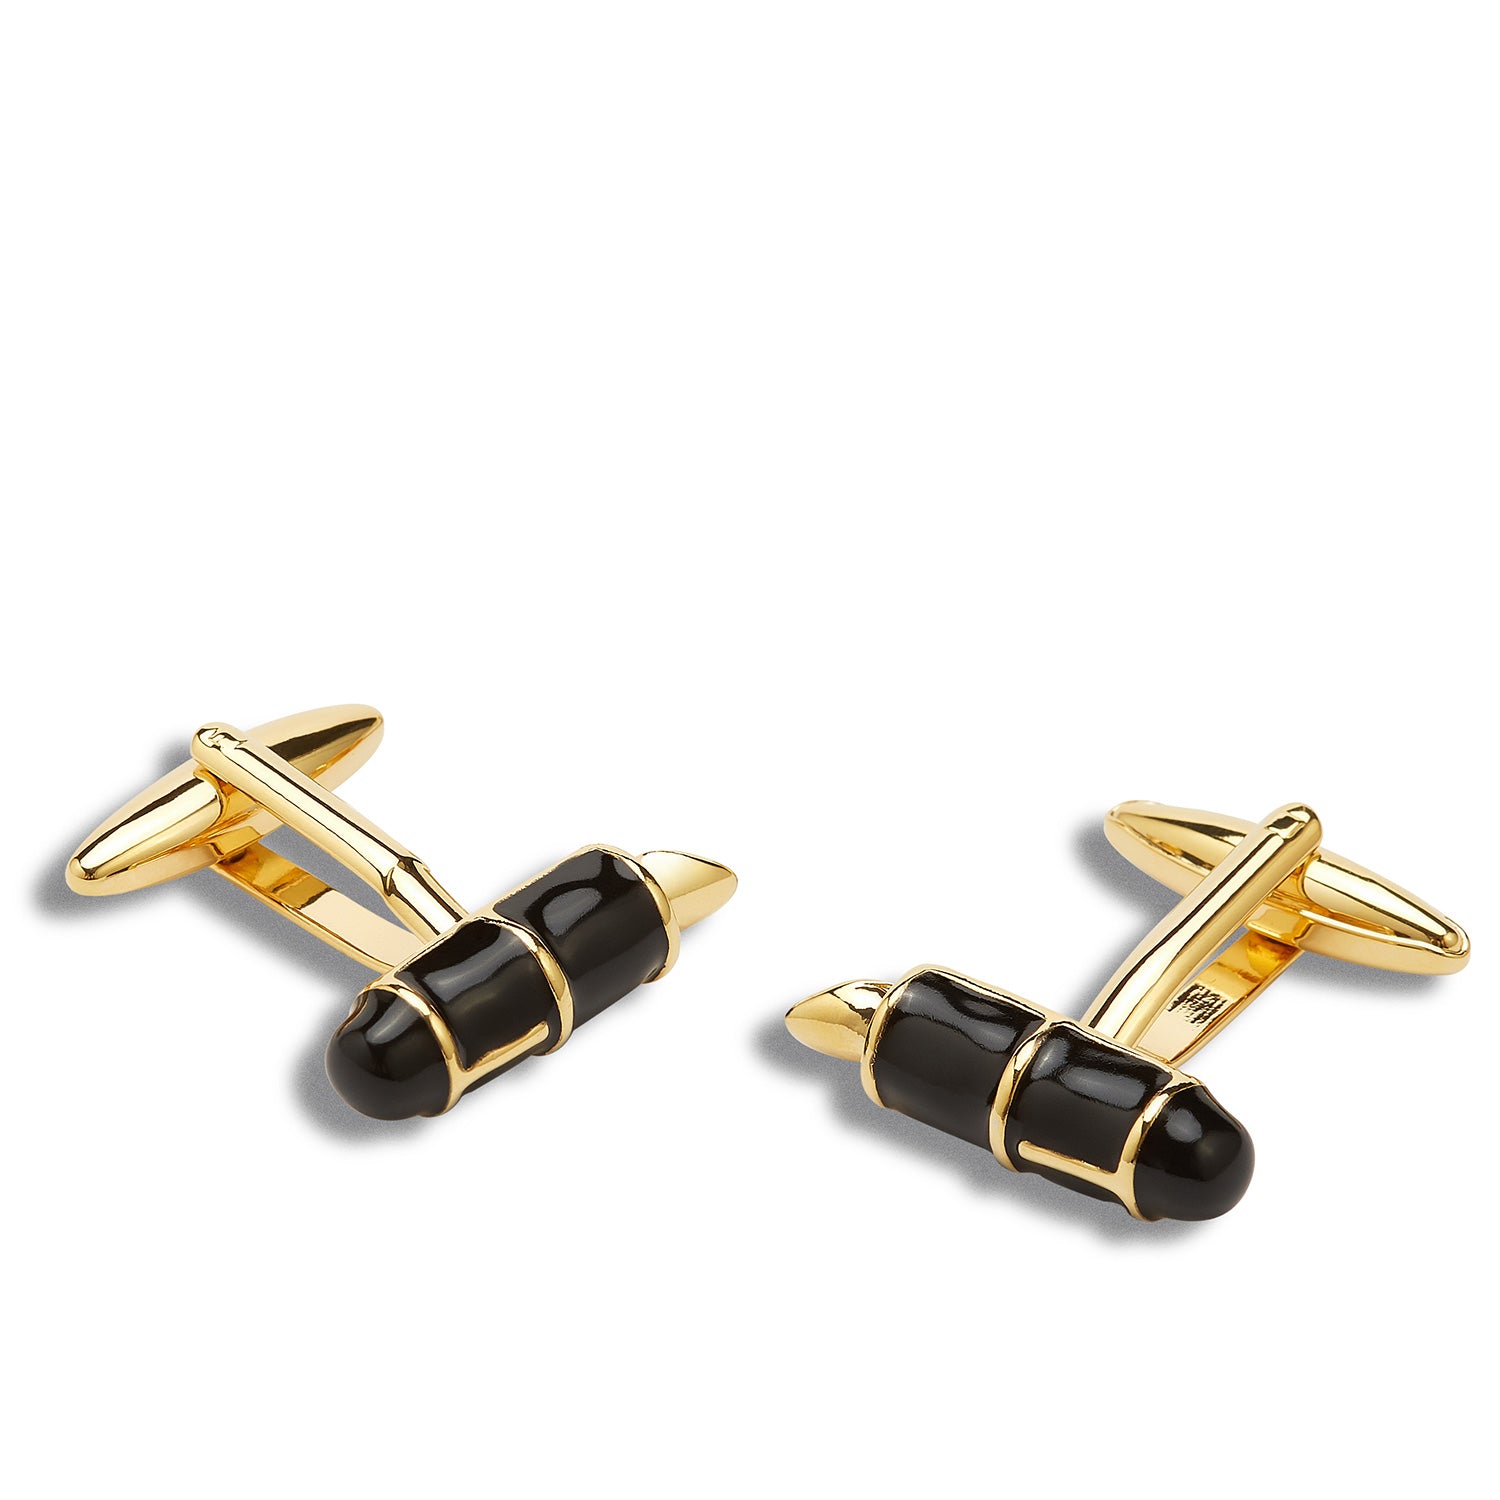 Black and Gold Fountain Pen Cufflinks